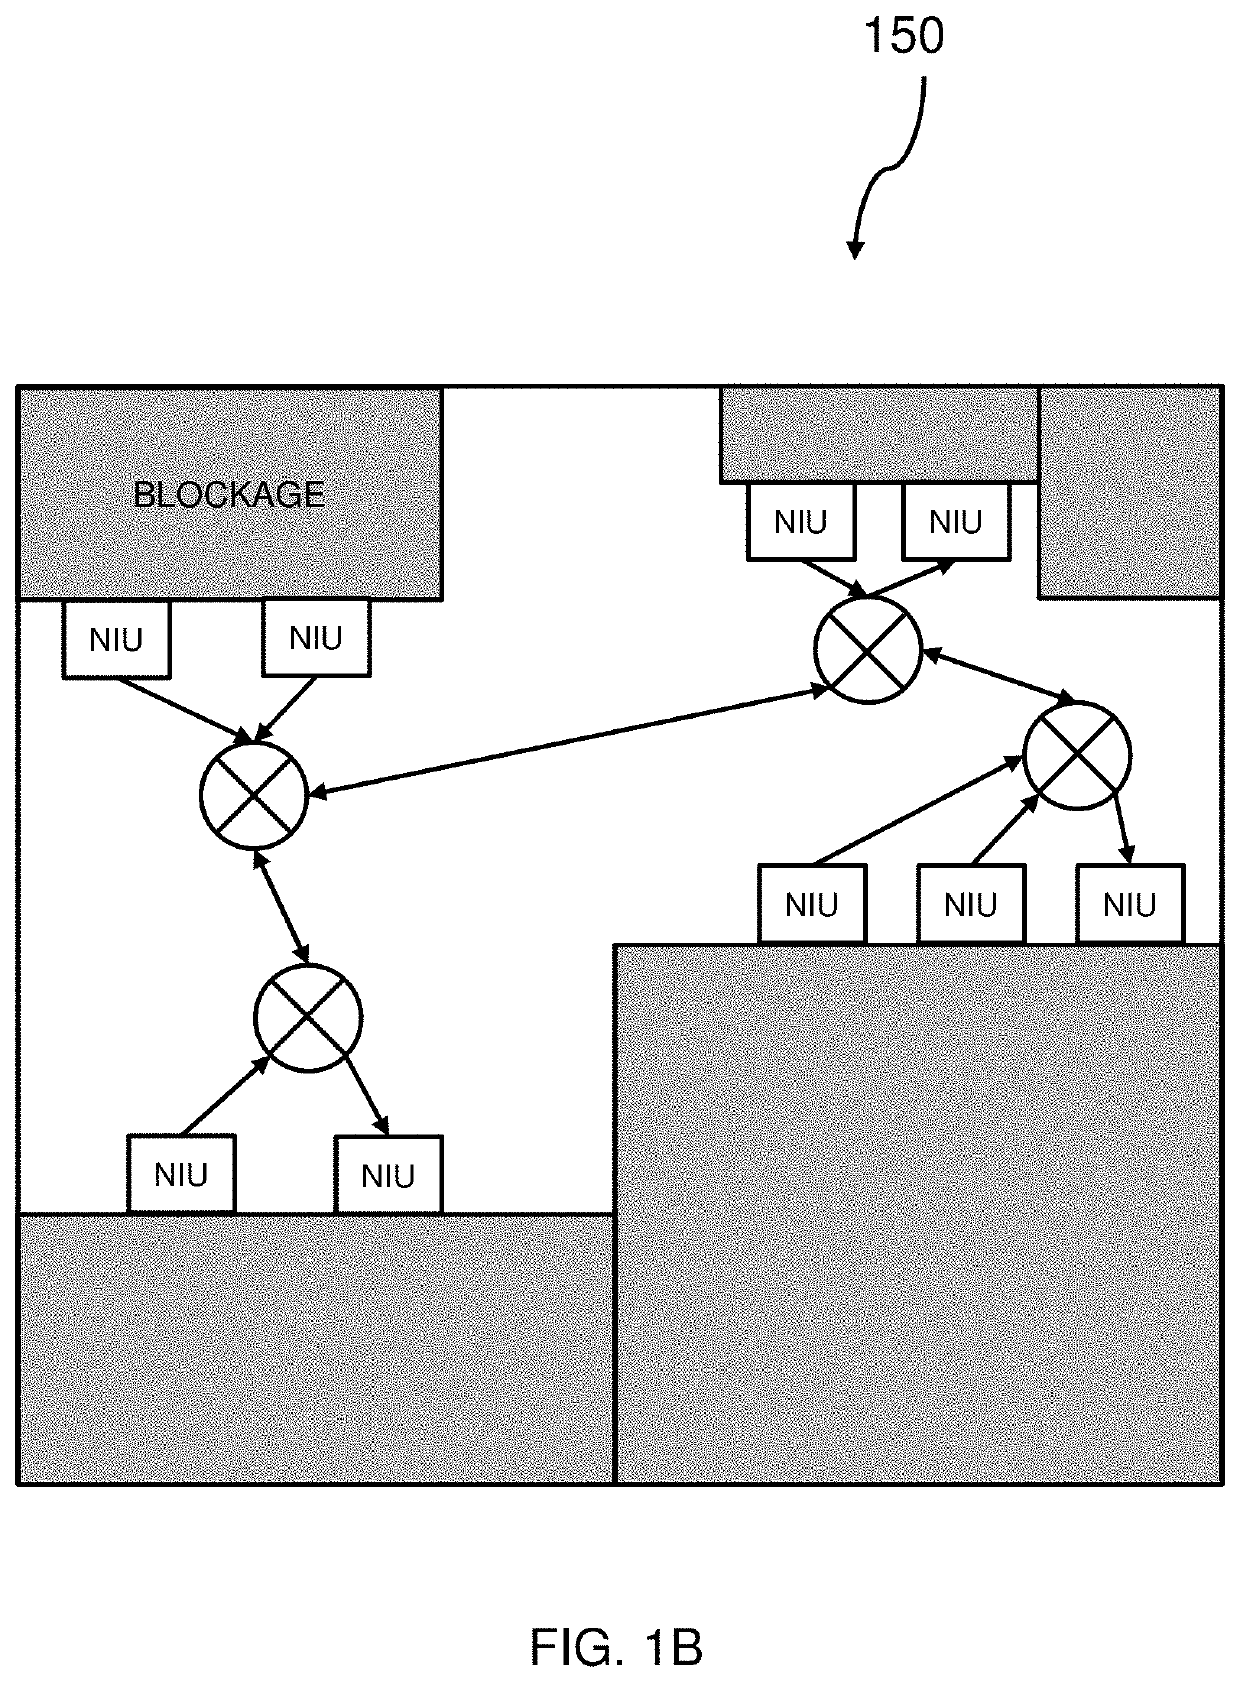 Physically aware topology synthesis of a network